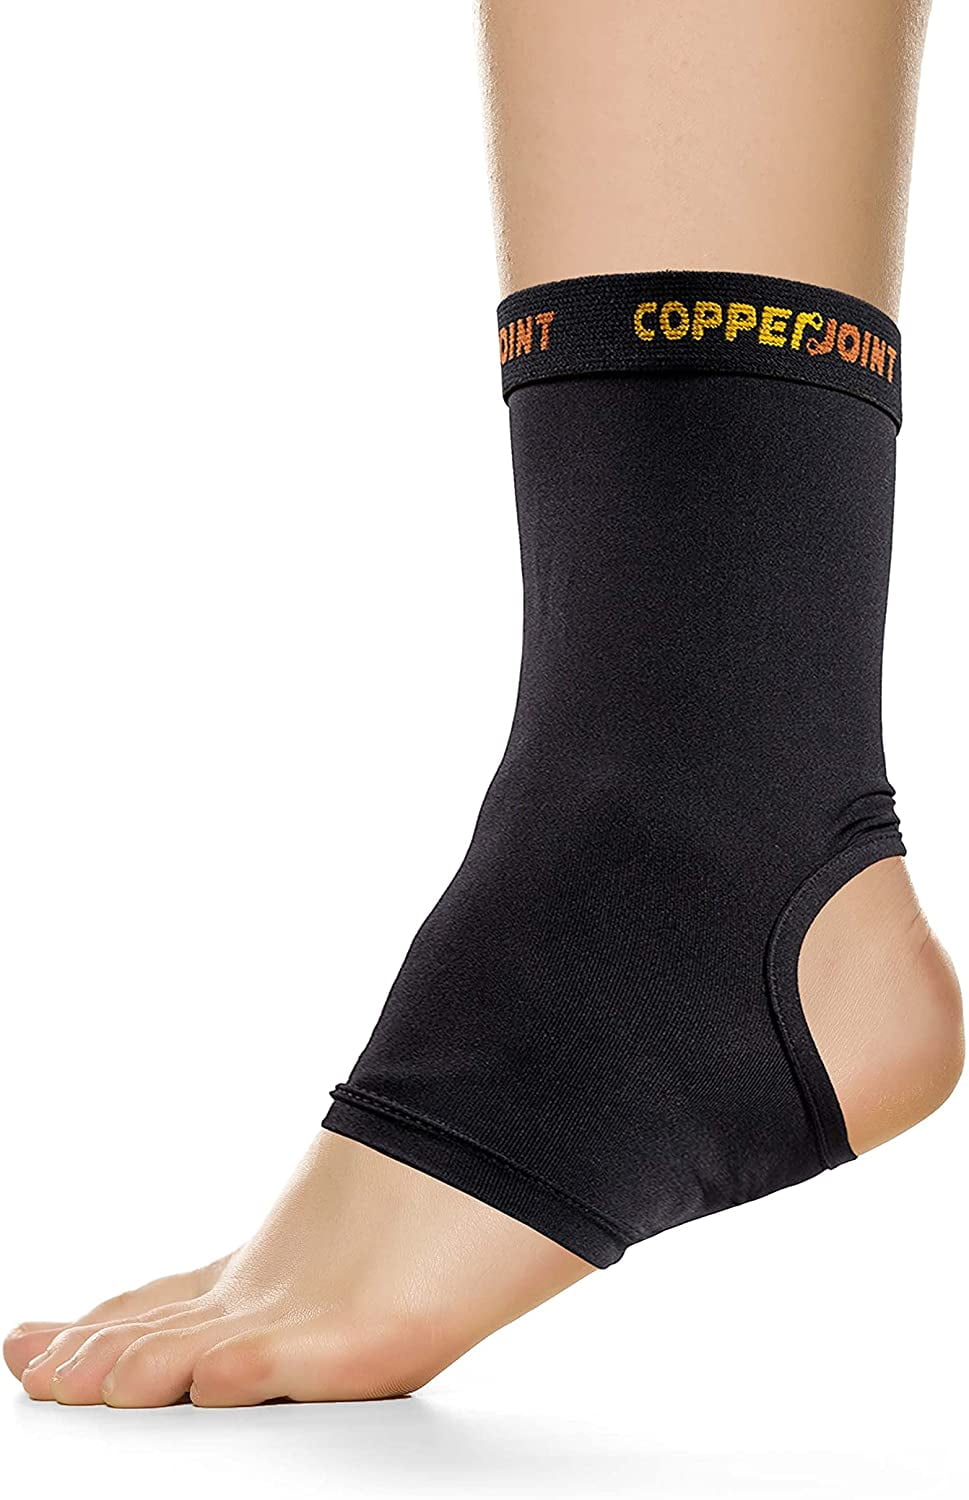 CopperJoint Ankle Compression Sleeve for Men and Women - Planter Fasciitis  Compression Foot Sleeve for Athletes - Copper Ankle Brace Supports Pain  Relief, Arthritis, Tendonitis - Black - Single - XL - Walmart.com